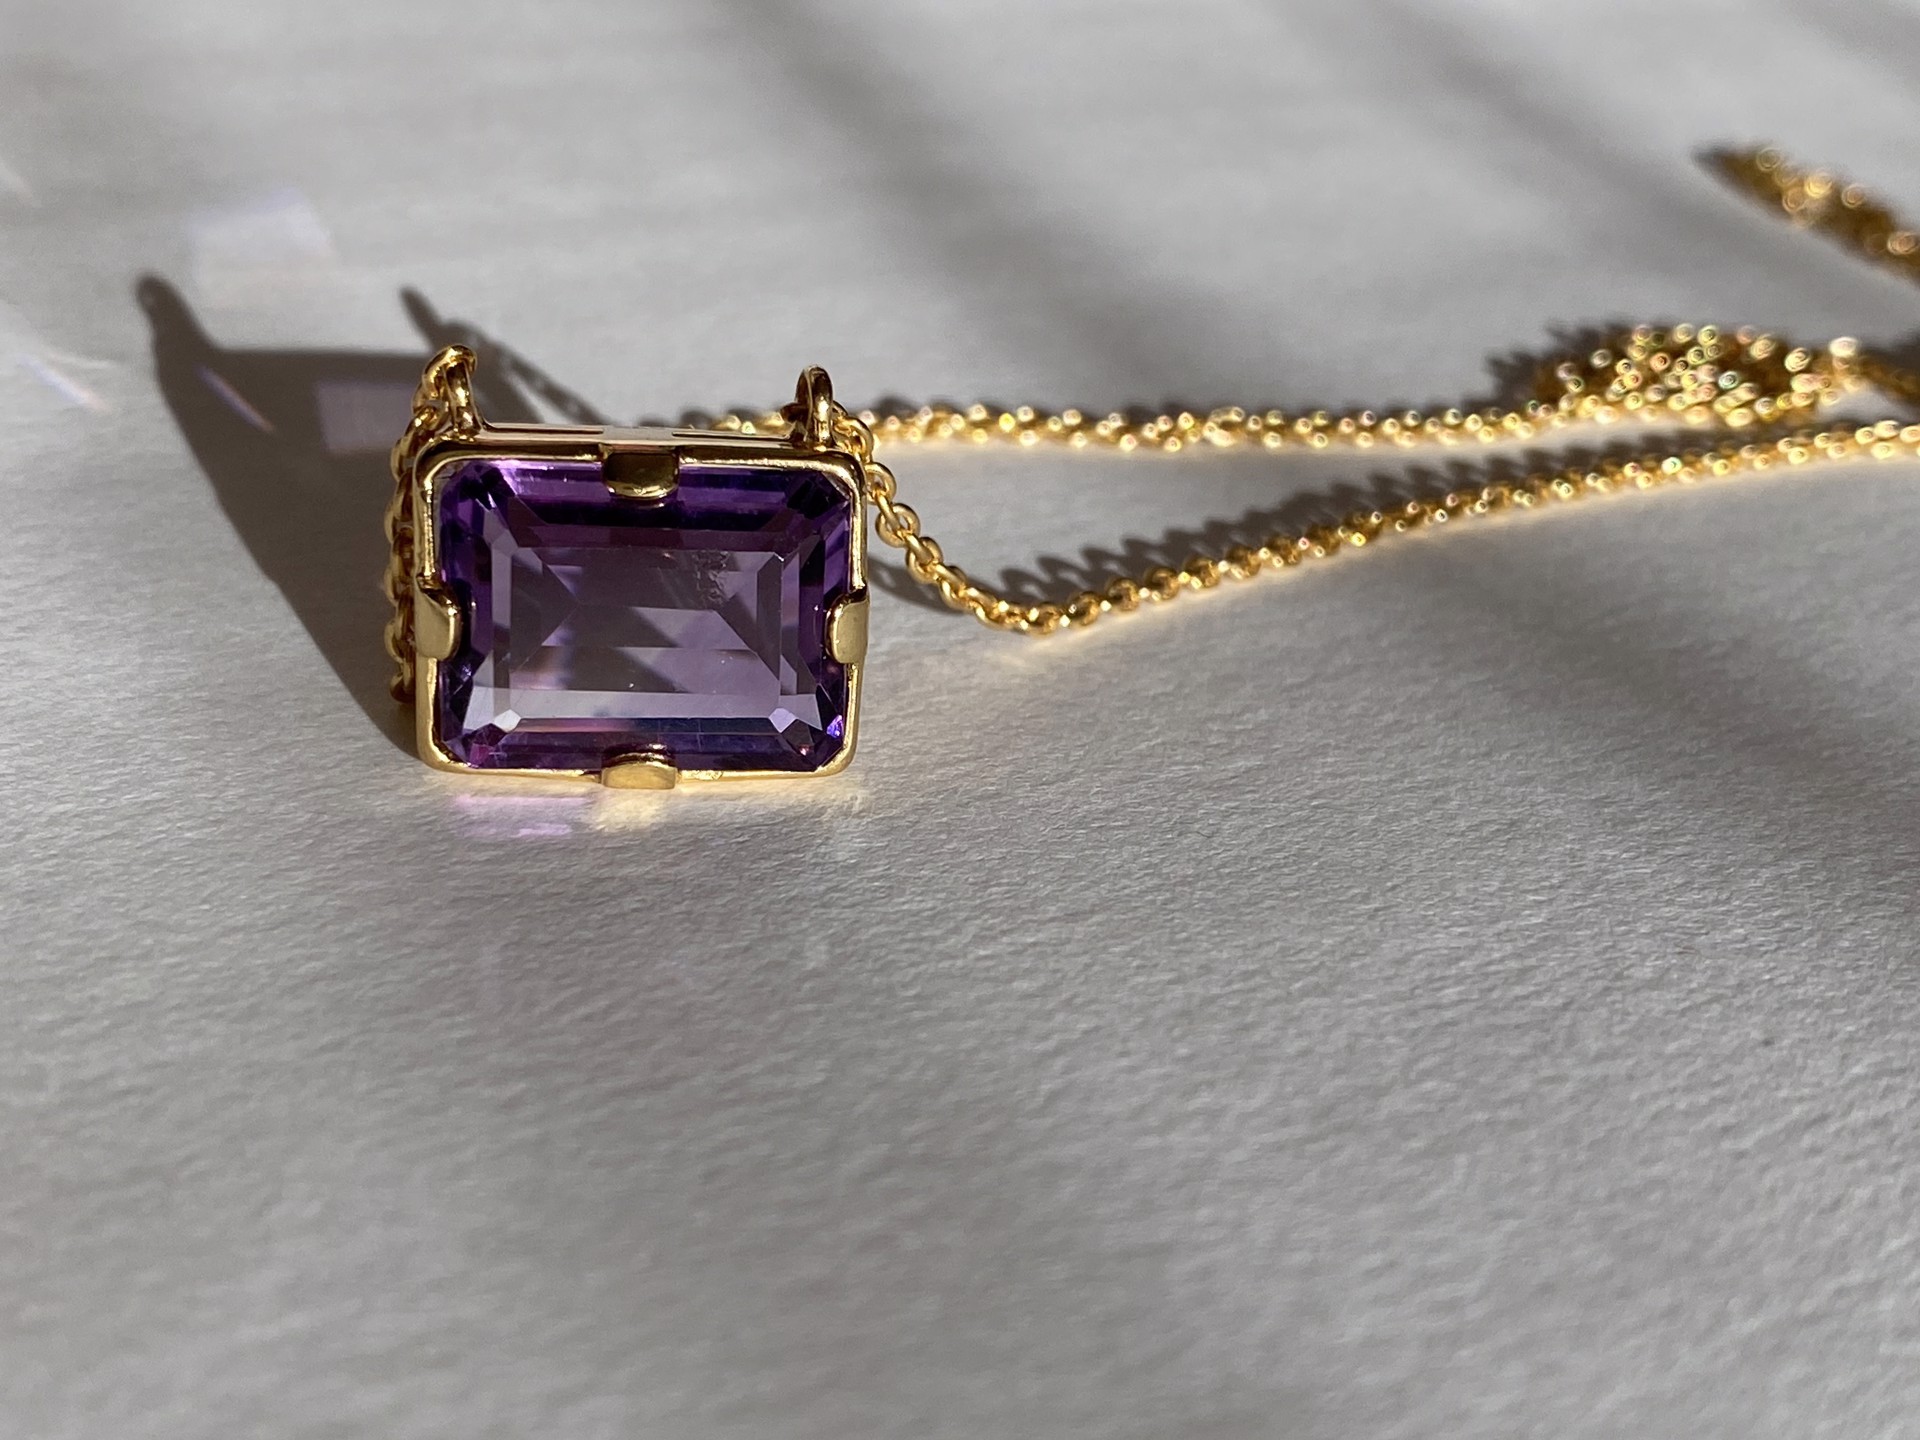 Box Style Necklace - Amethyst by J.Catma